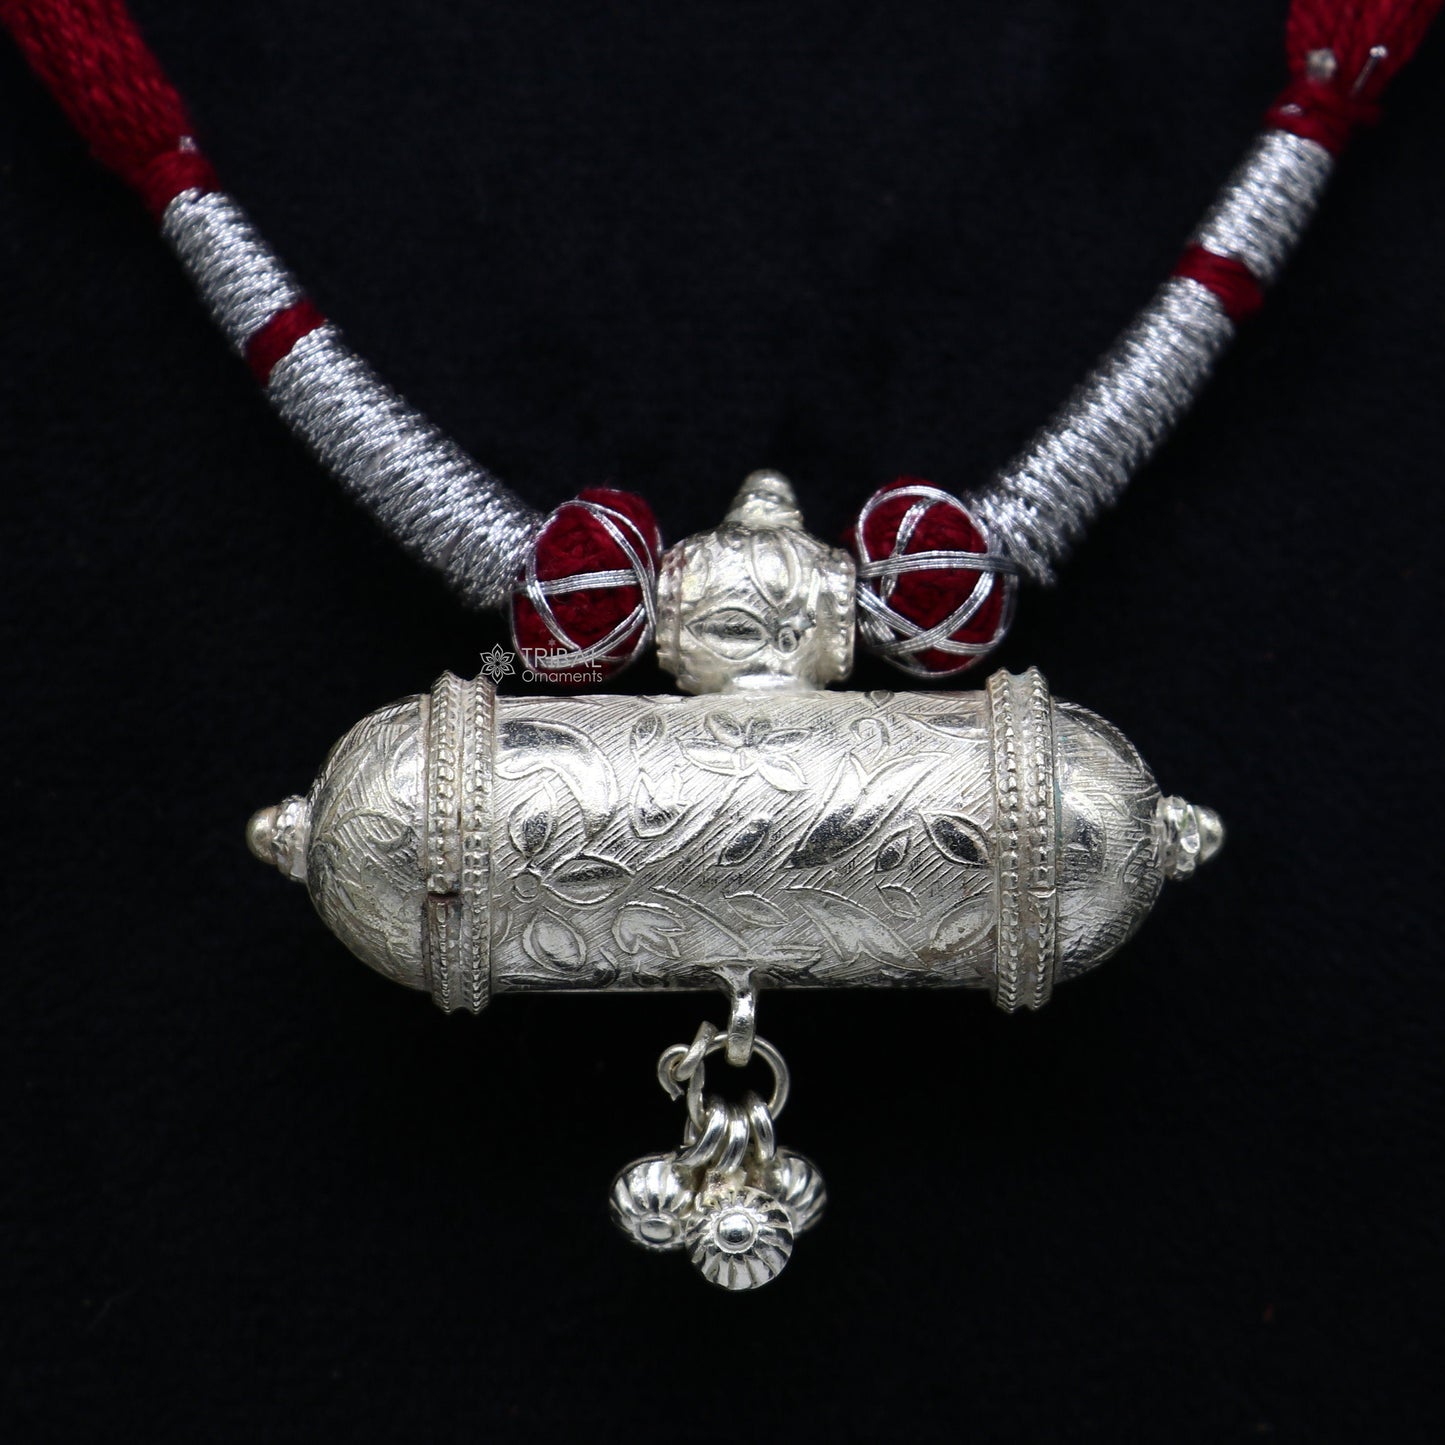 925 Sterling silver handmade Ethnic cultural tribal pendant with dark red thread necklace traditional choker brides jewelry set652